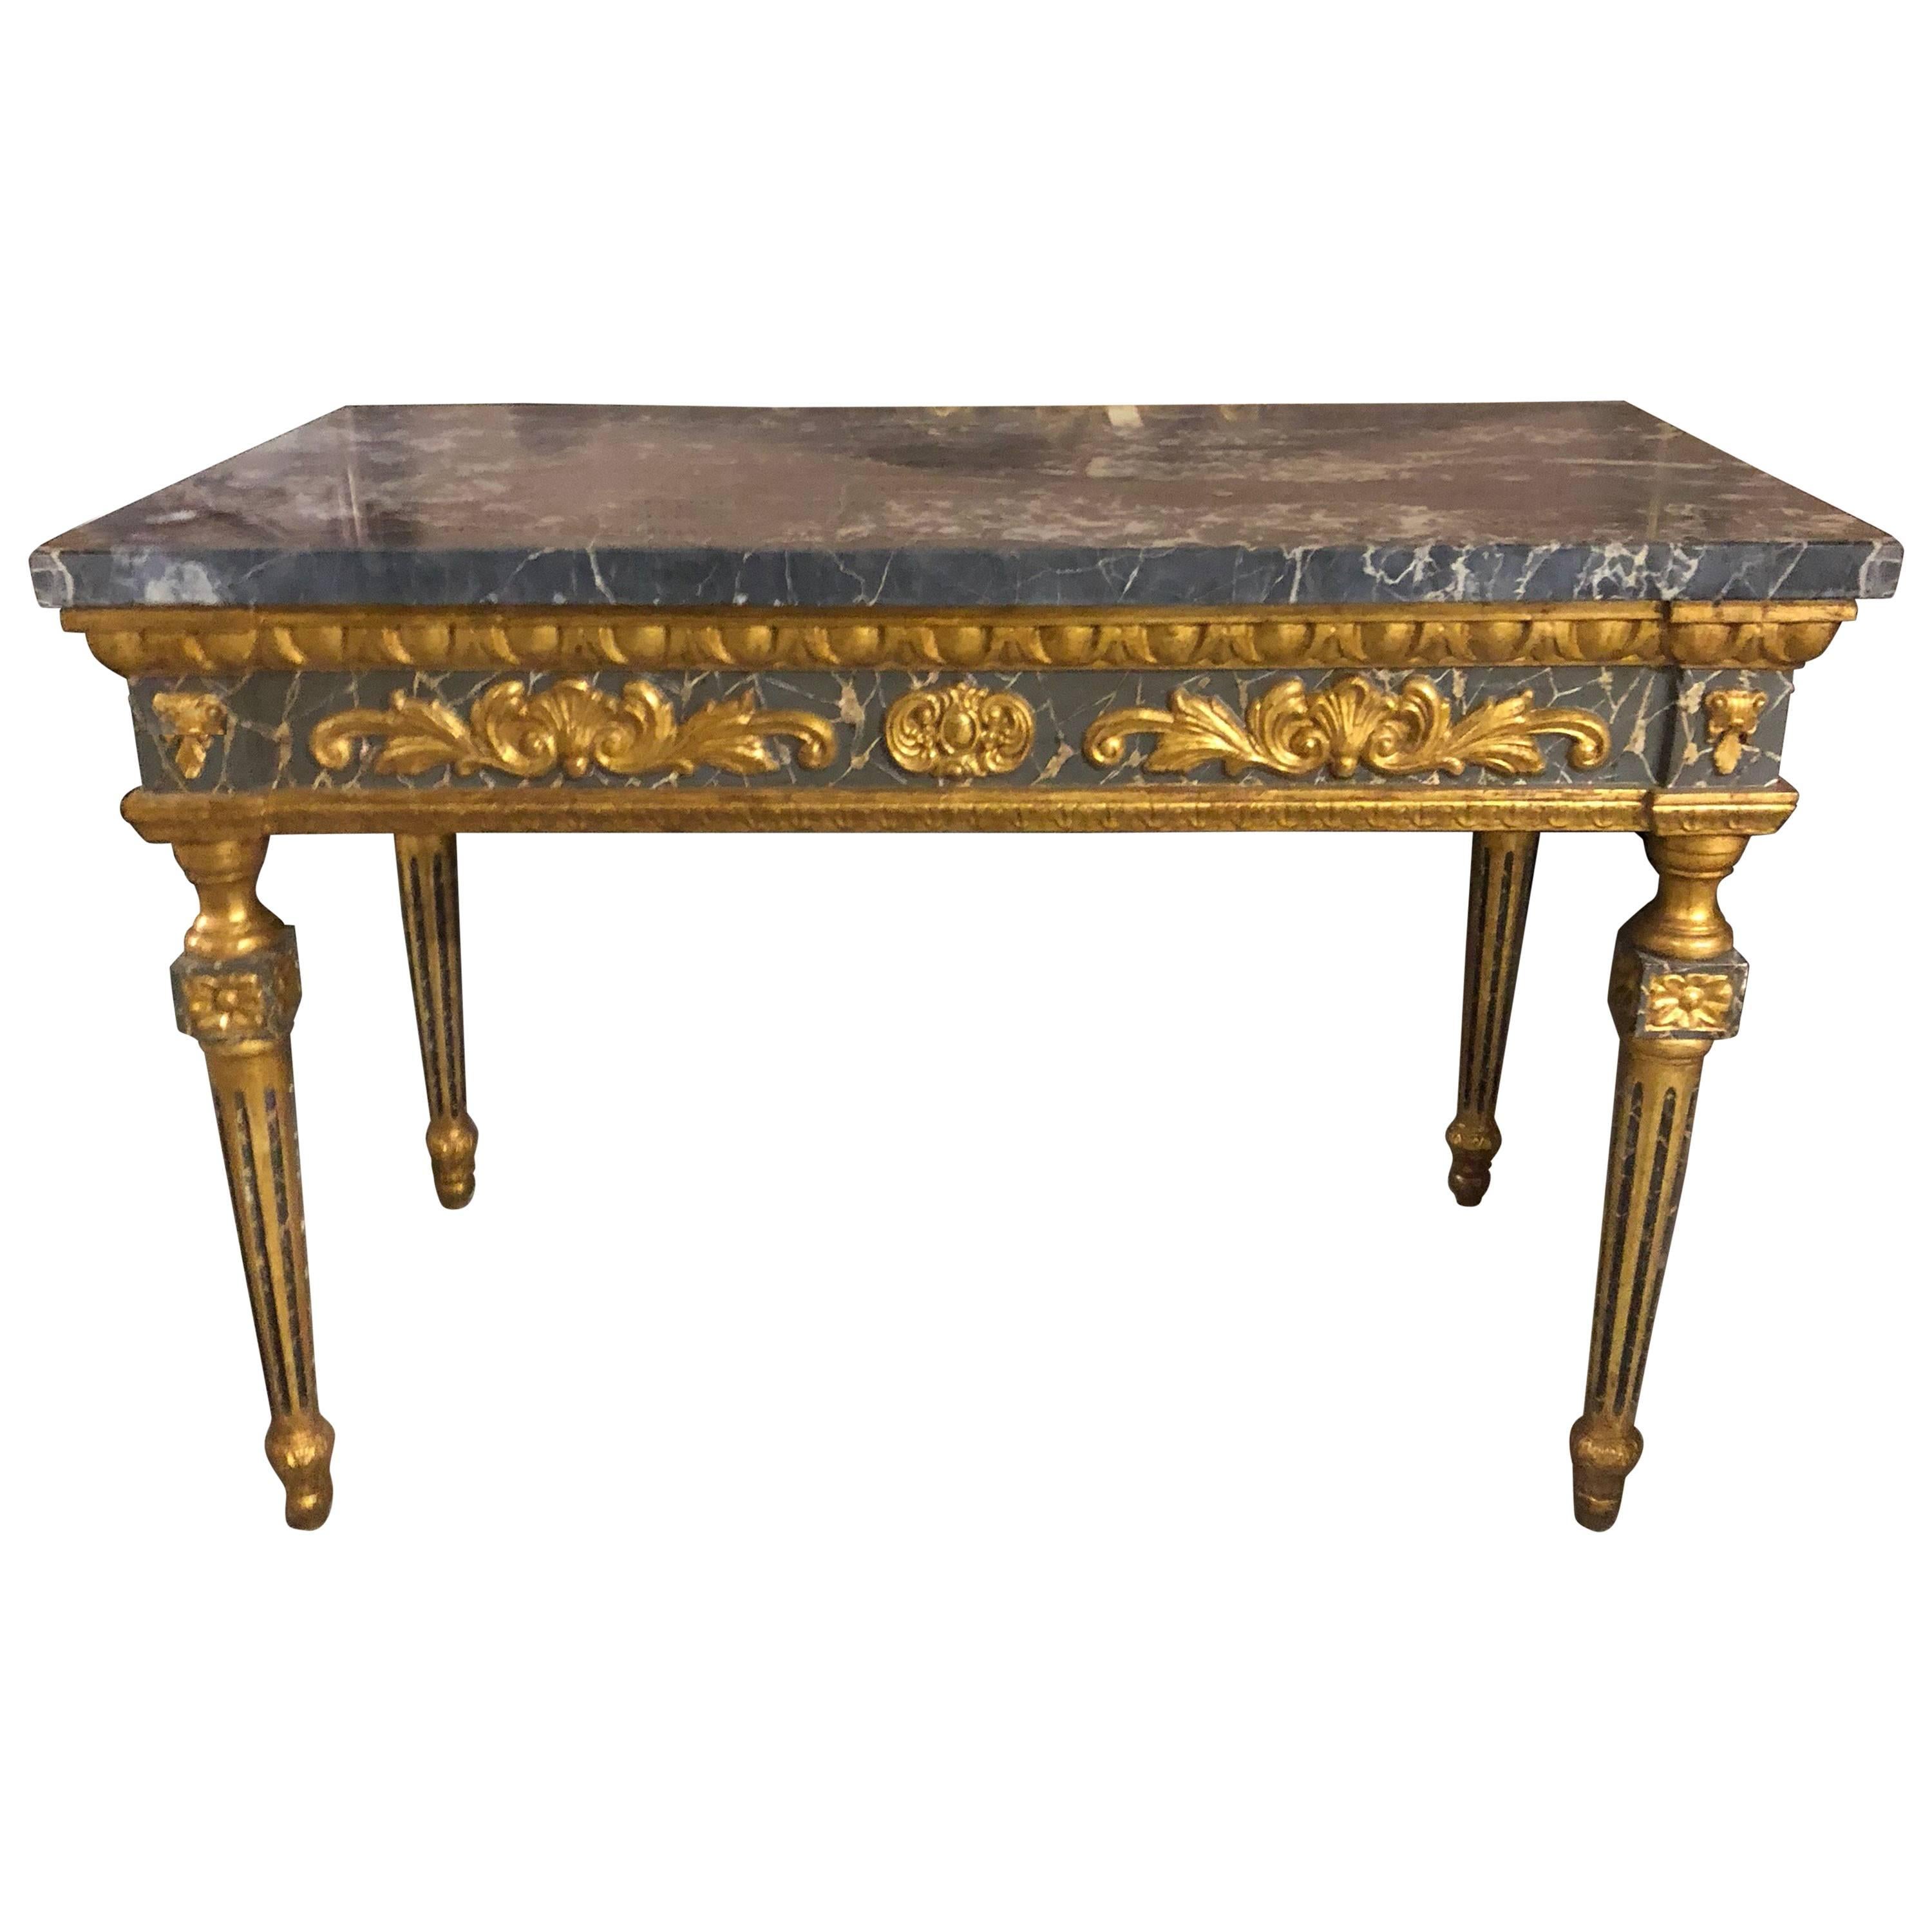 Italian Painted and Parcel-Gilt Marble Topped Centre Table